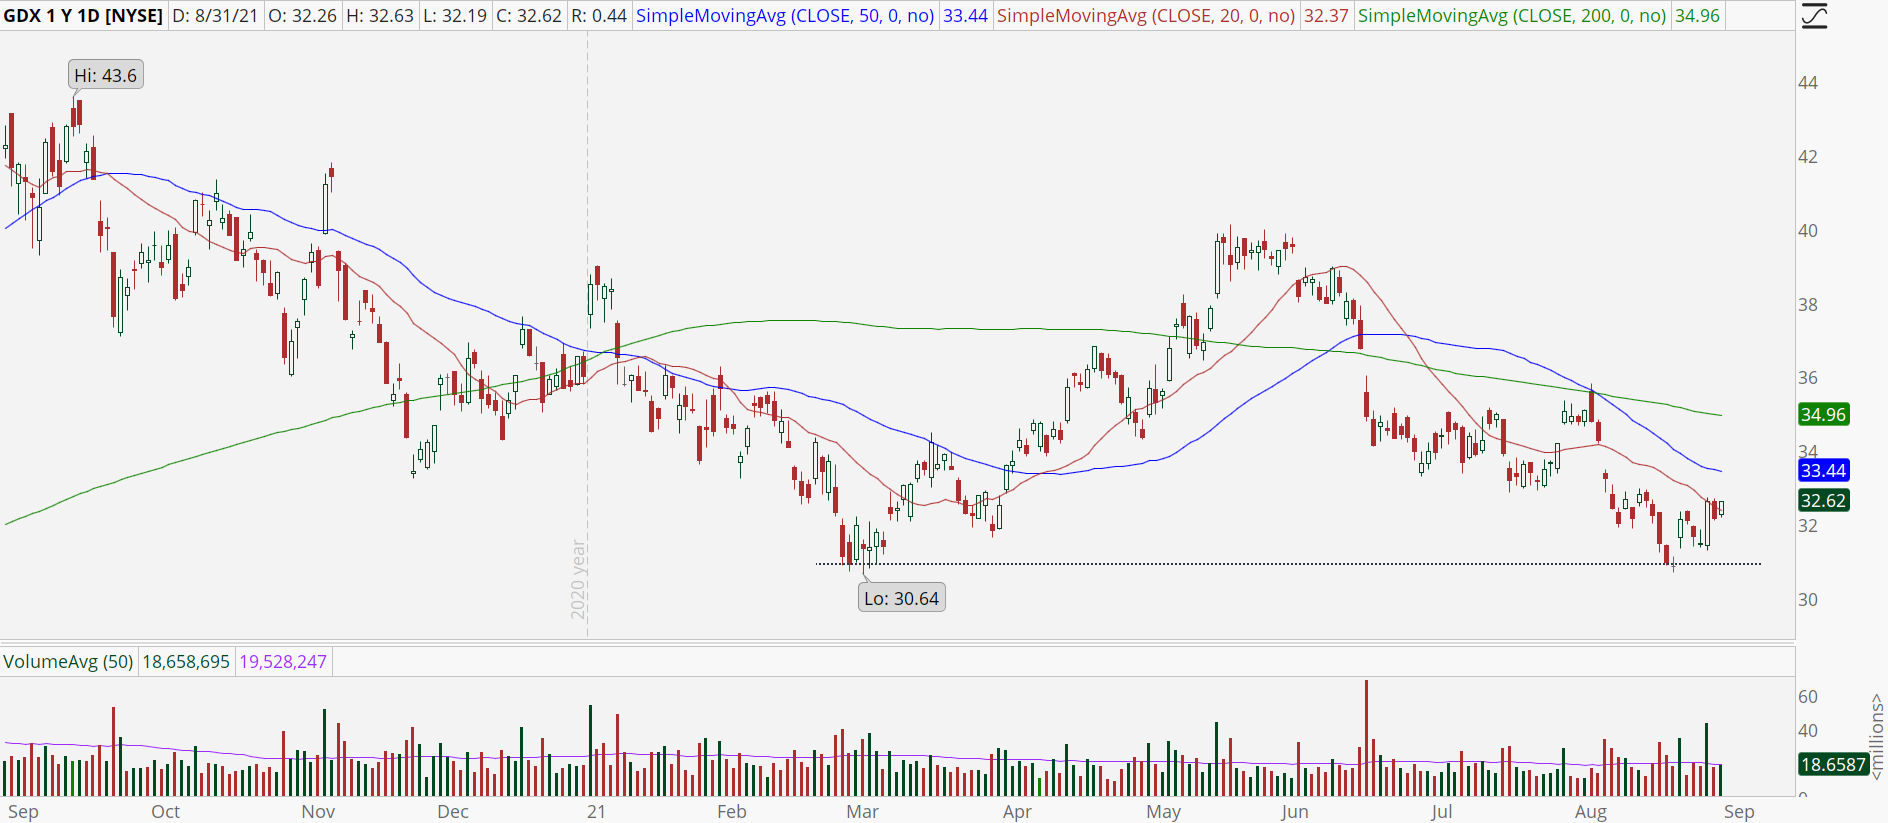 Gold Miners (GDX) stock chart with bottom pattern